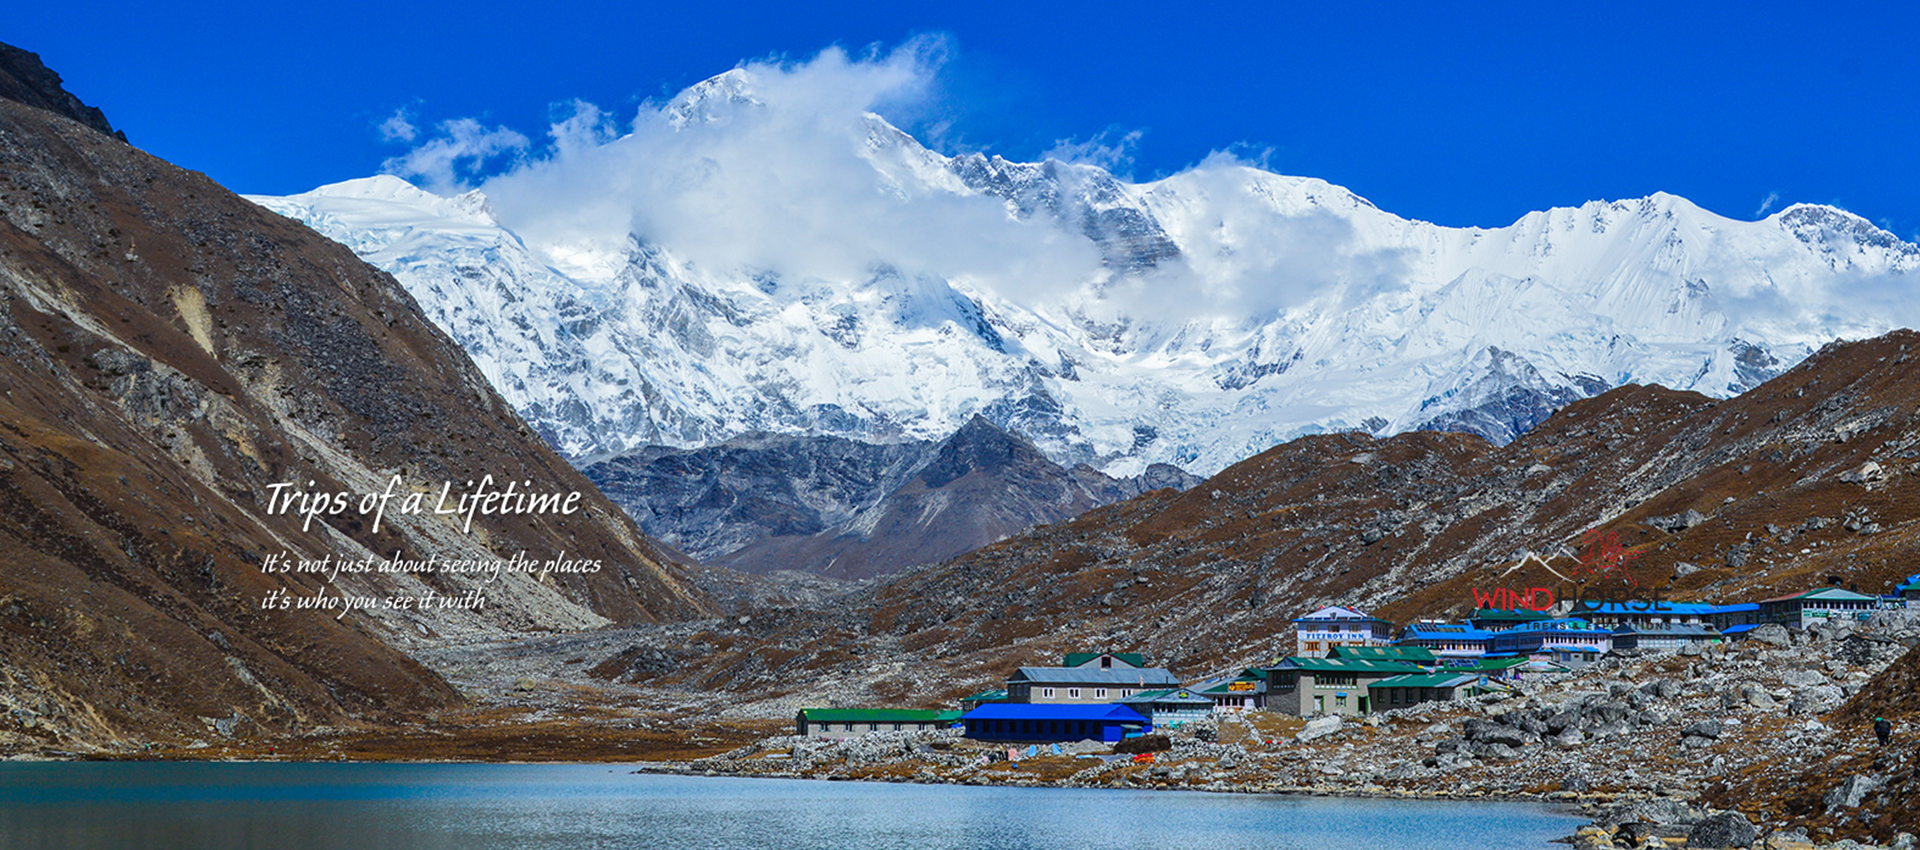 All you need to know about Everest Base Camp Trek Cost